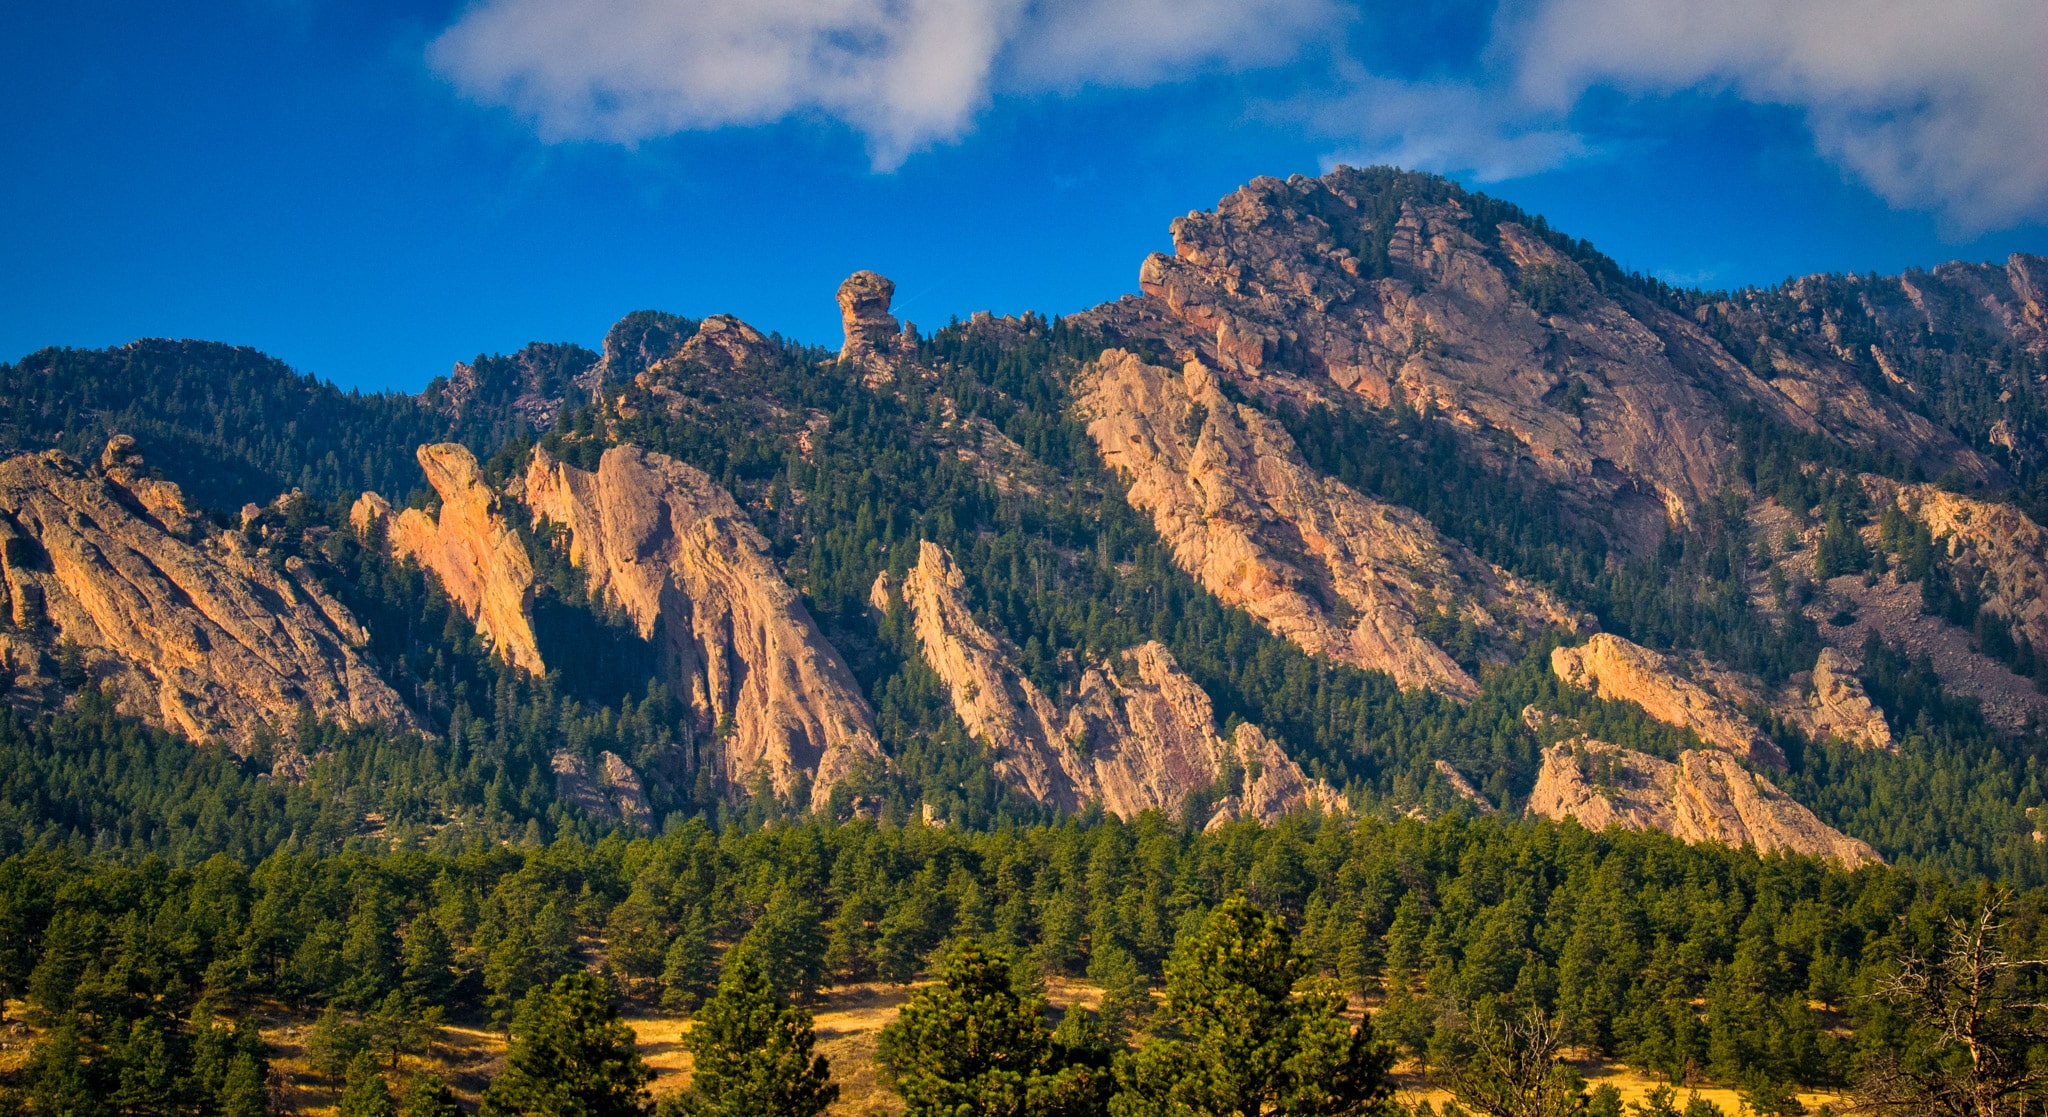 This is a view of the rock formation called the Devils thumb that is located in the foothills on the west side of Boulder, Colorado.